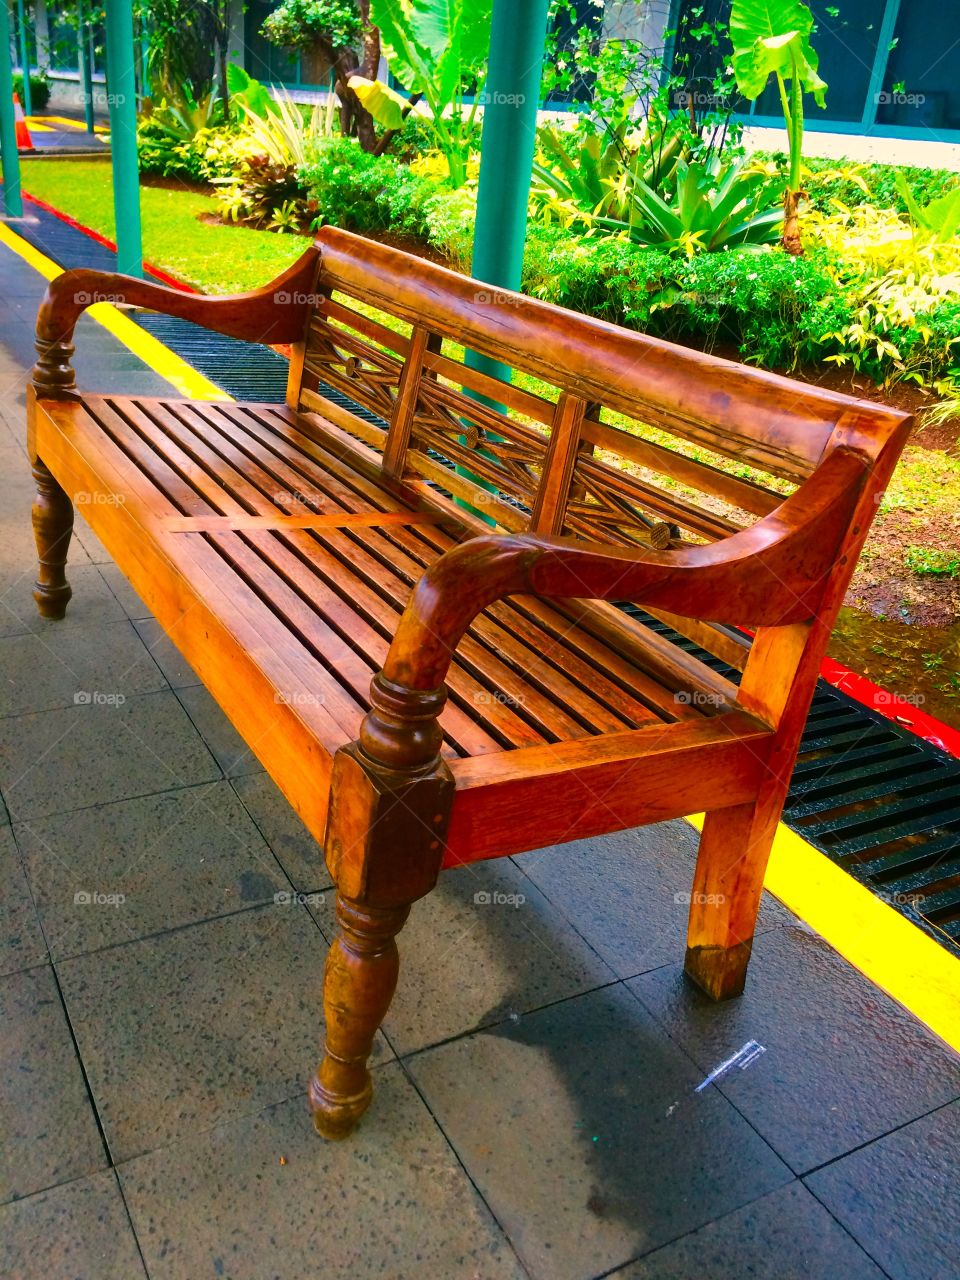 A park without benches is like an uninhabited forest. As small as the size of a park bench, this one equipment becomes important and must be in your home garden.

No need to be fancy and expensive, 4,Nov,2019. Jakarta city indonesia 